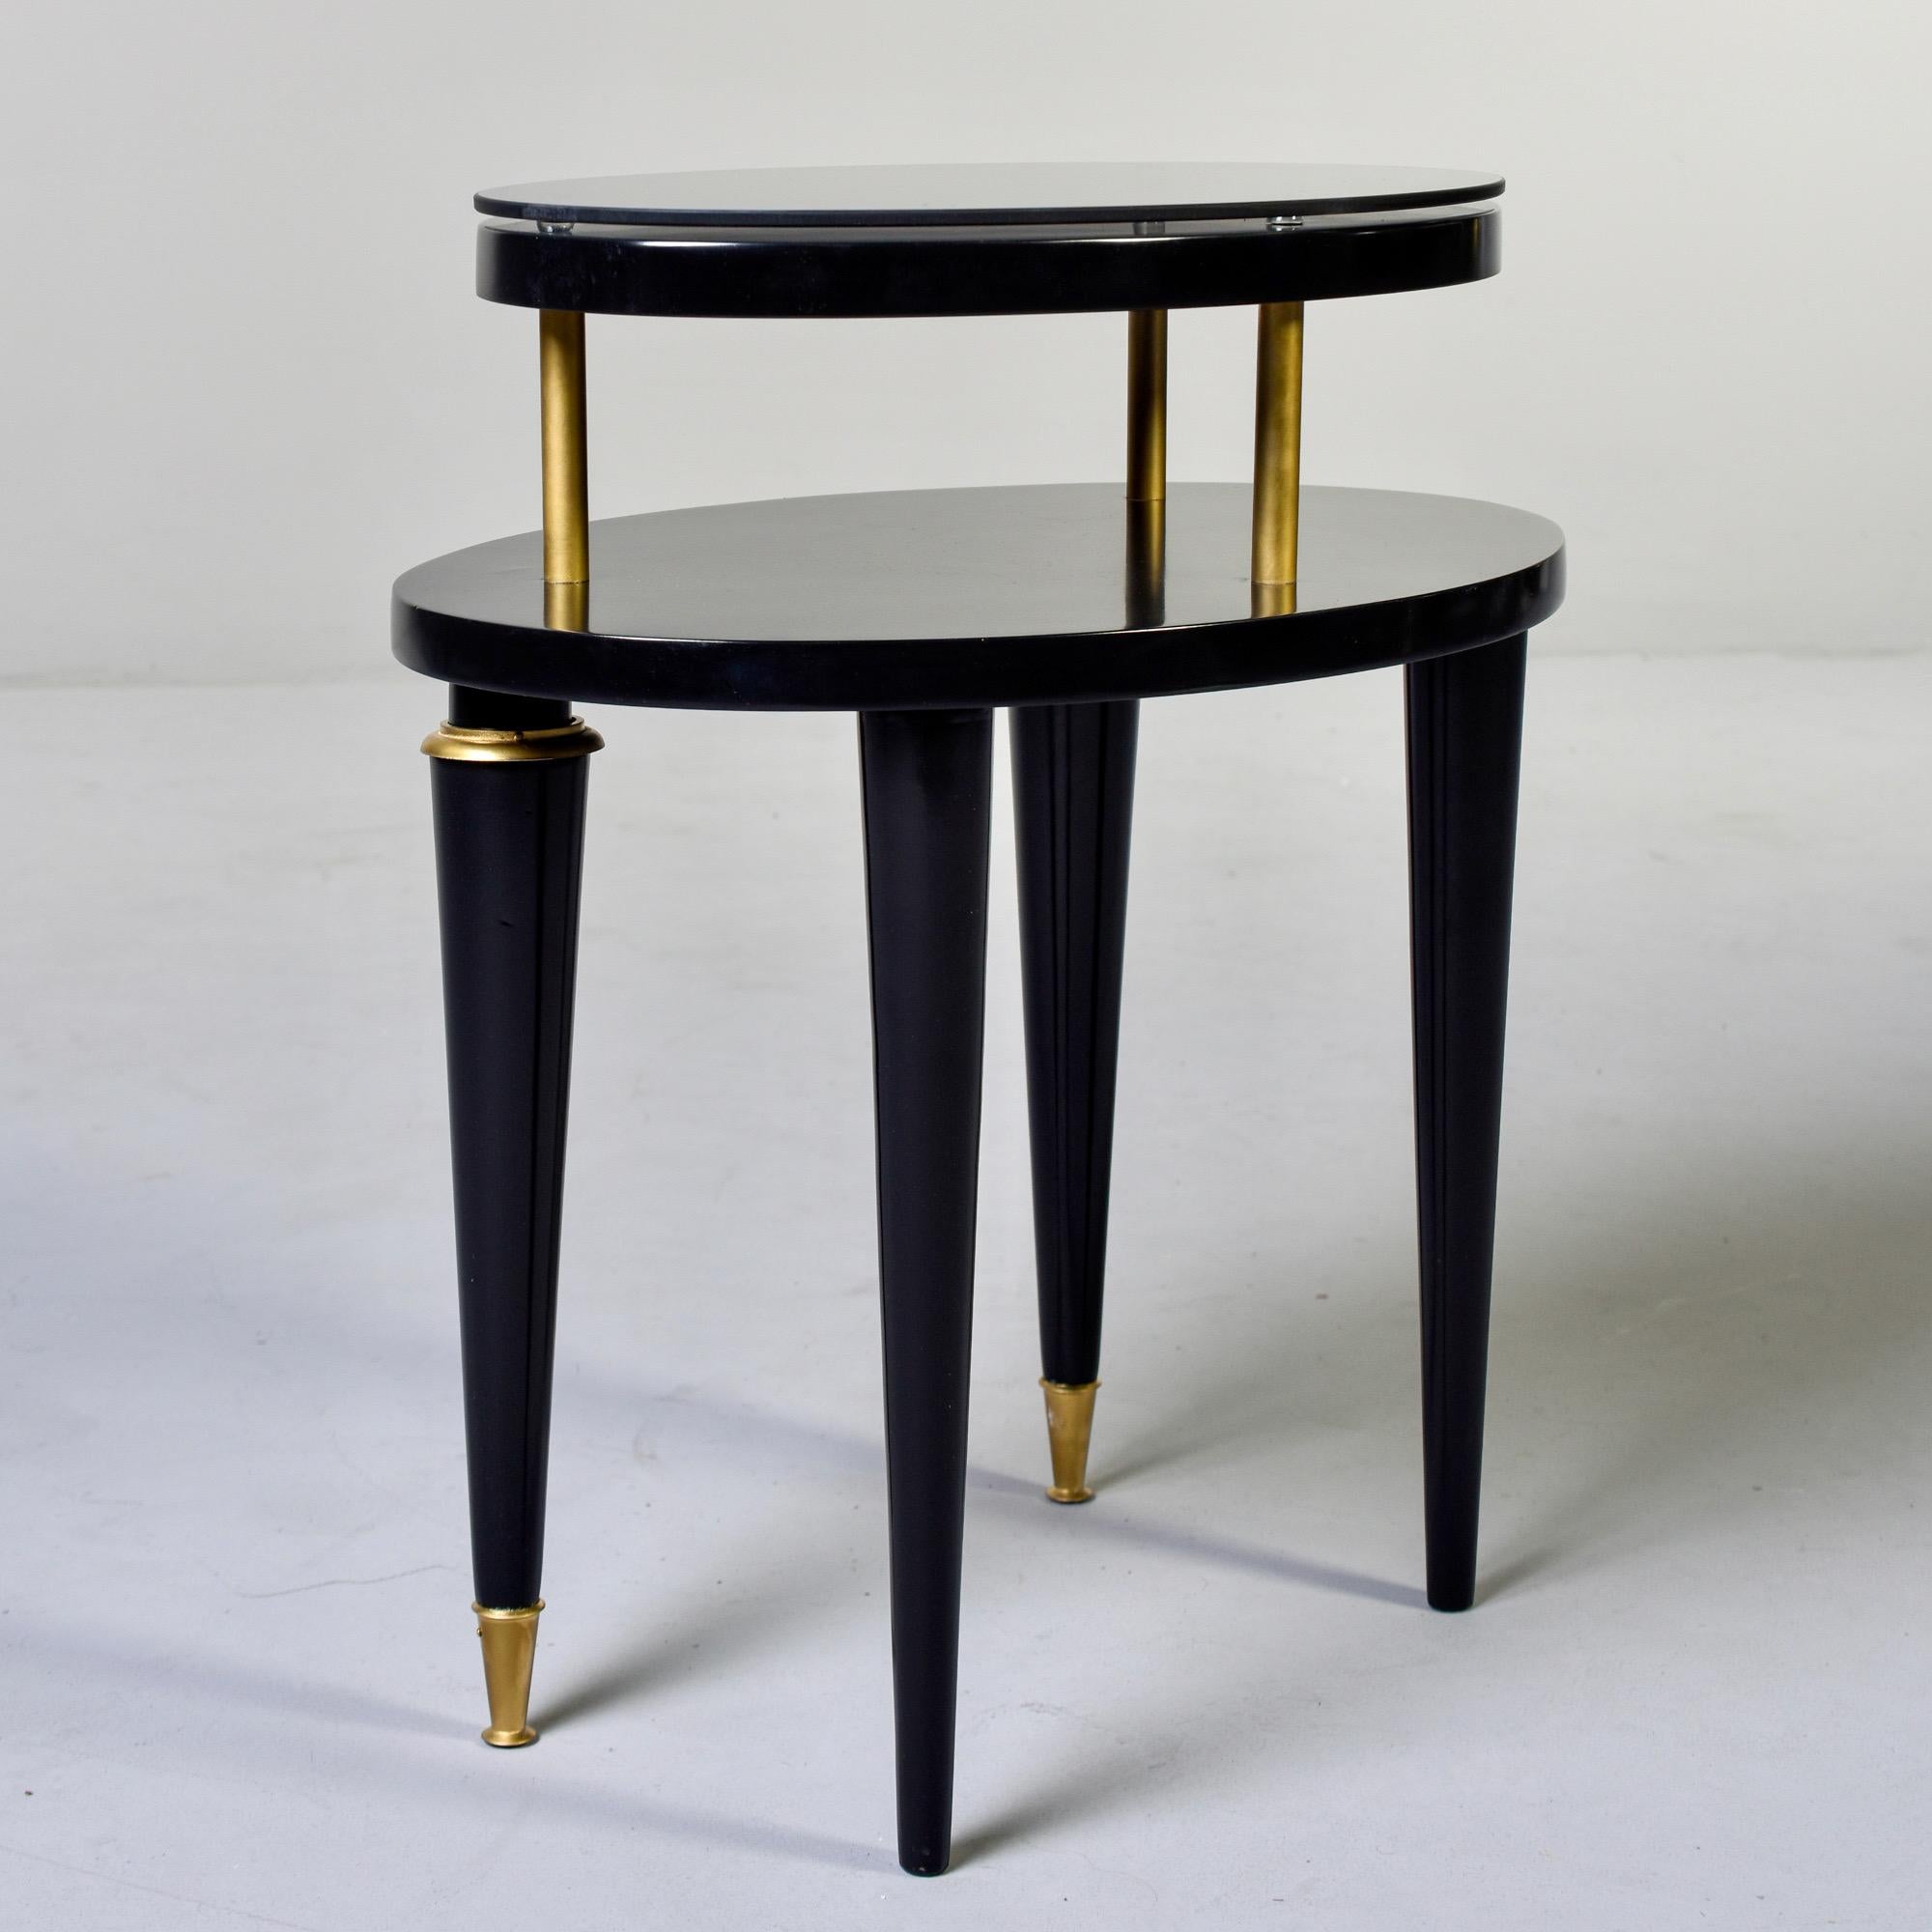 20th Century French Art Deco Oval Ebonized Side Table with Brass Trim